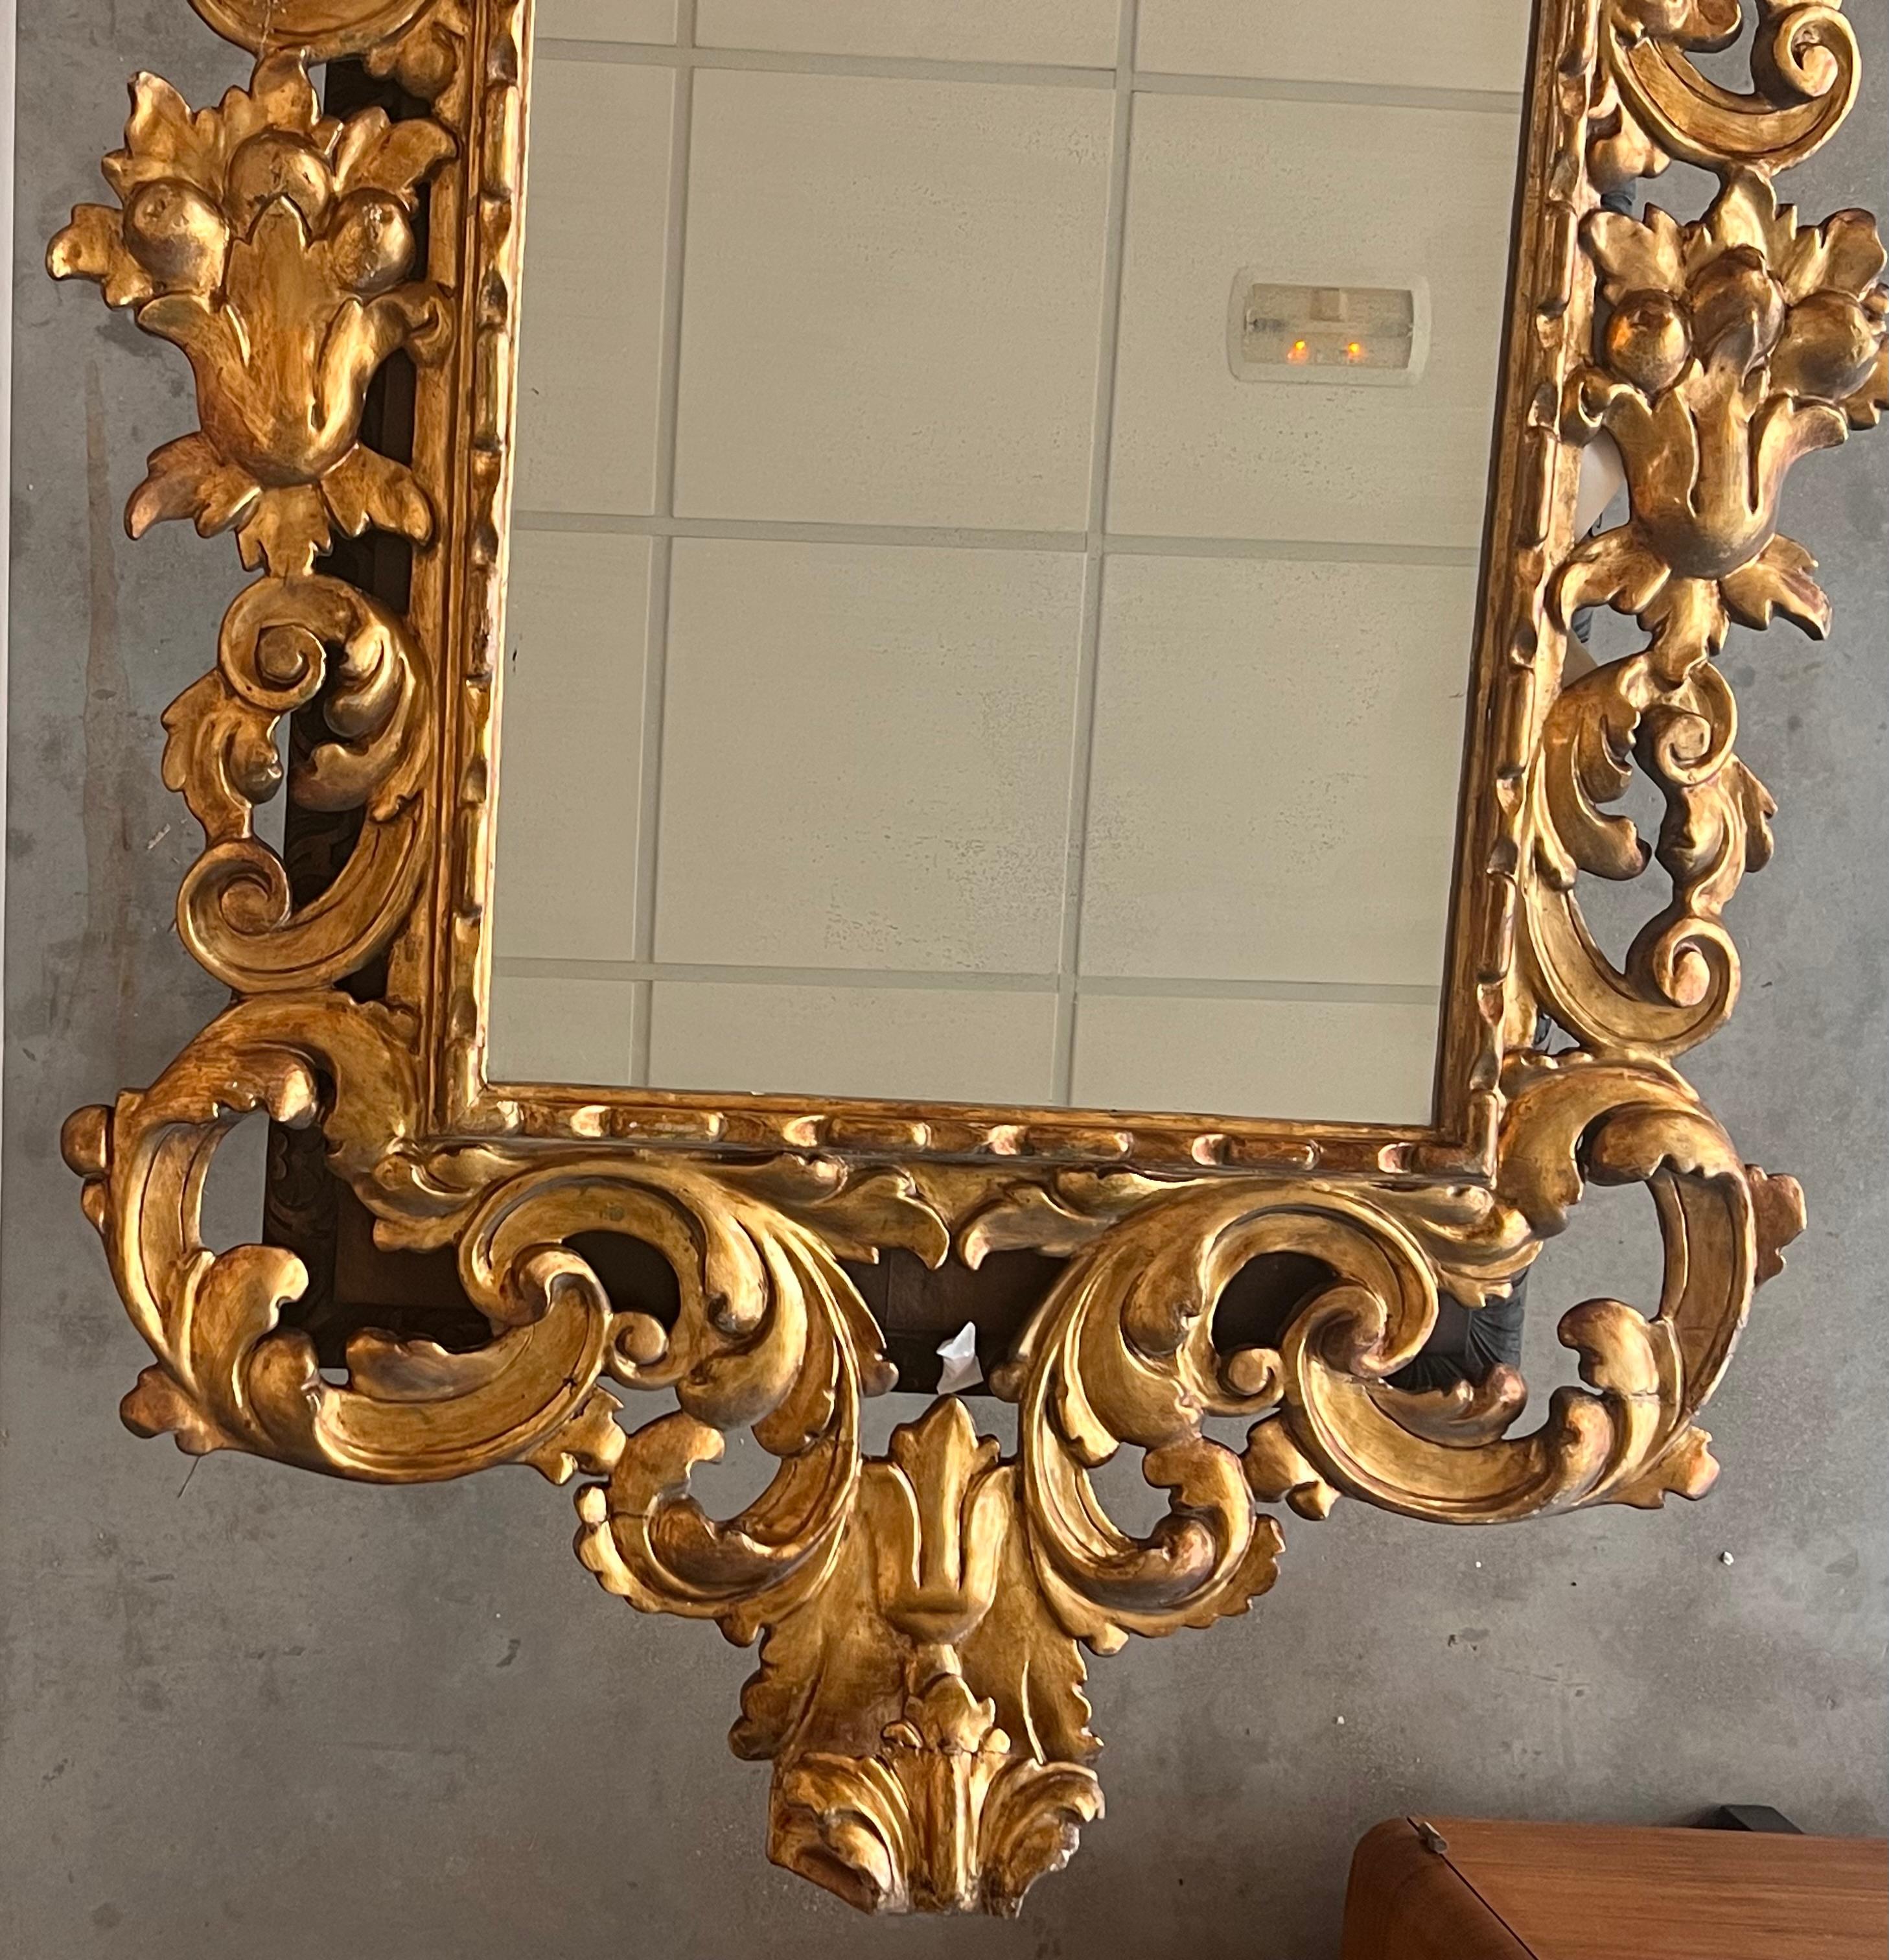 Early 20th French Empire period carved gilt wood rectangular mirror with crest
An exceptional hand carved and gilded Italian mirror. Highly carved with flowers , original glass (possibly re-silvered) and original wood backs. Italy, late 19th